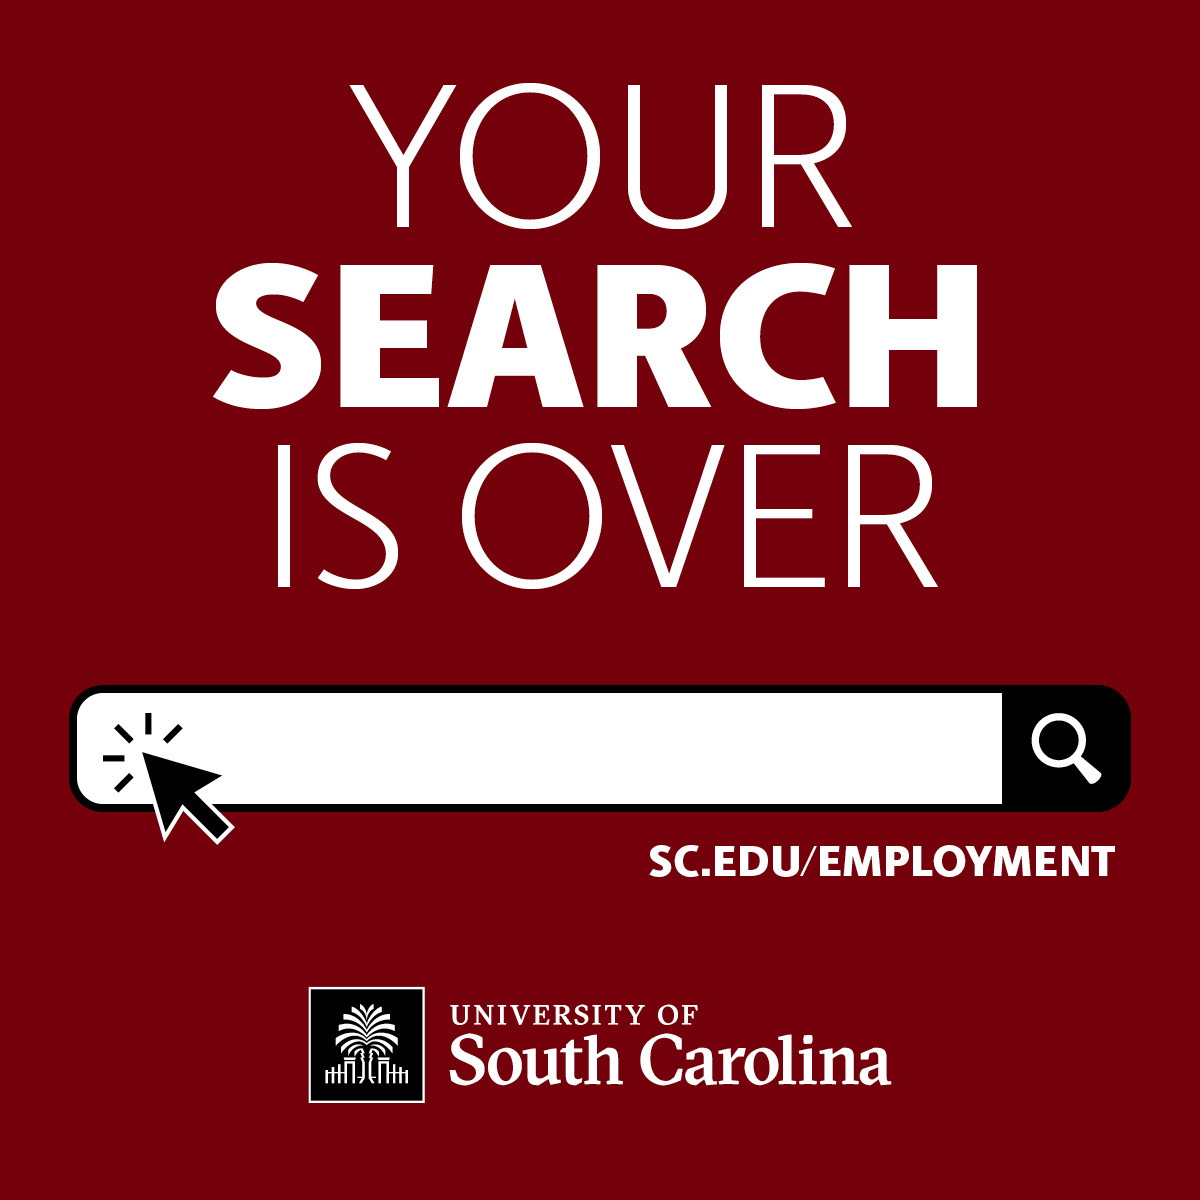 Your Search Is Over graphic